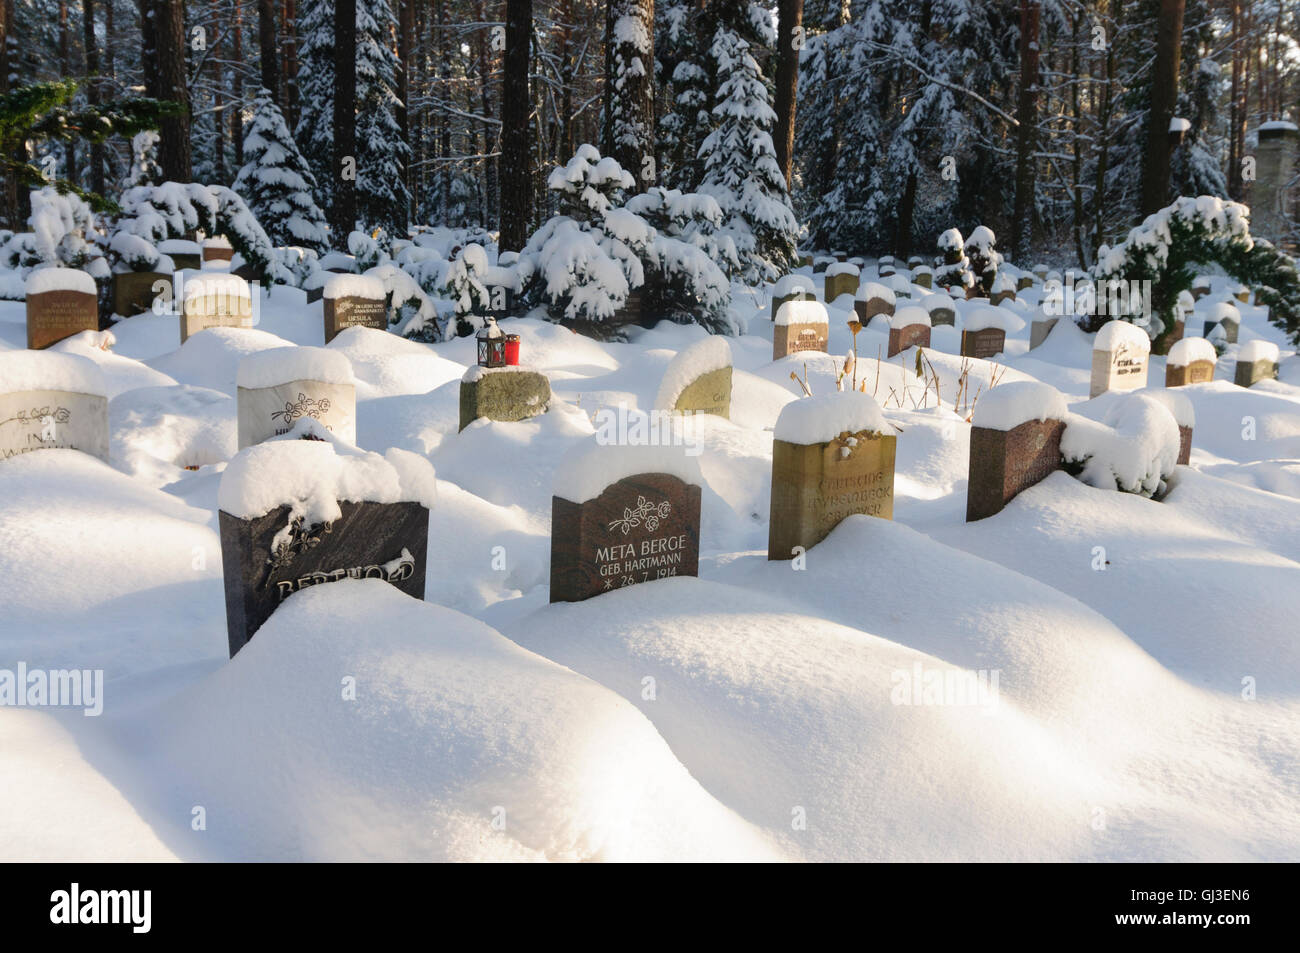 Dresden: Tombs grave stones at the cemetery deep in snow, Germany, Sachsen, Saxony, Stock Photo